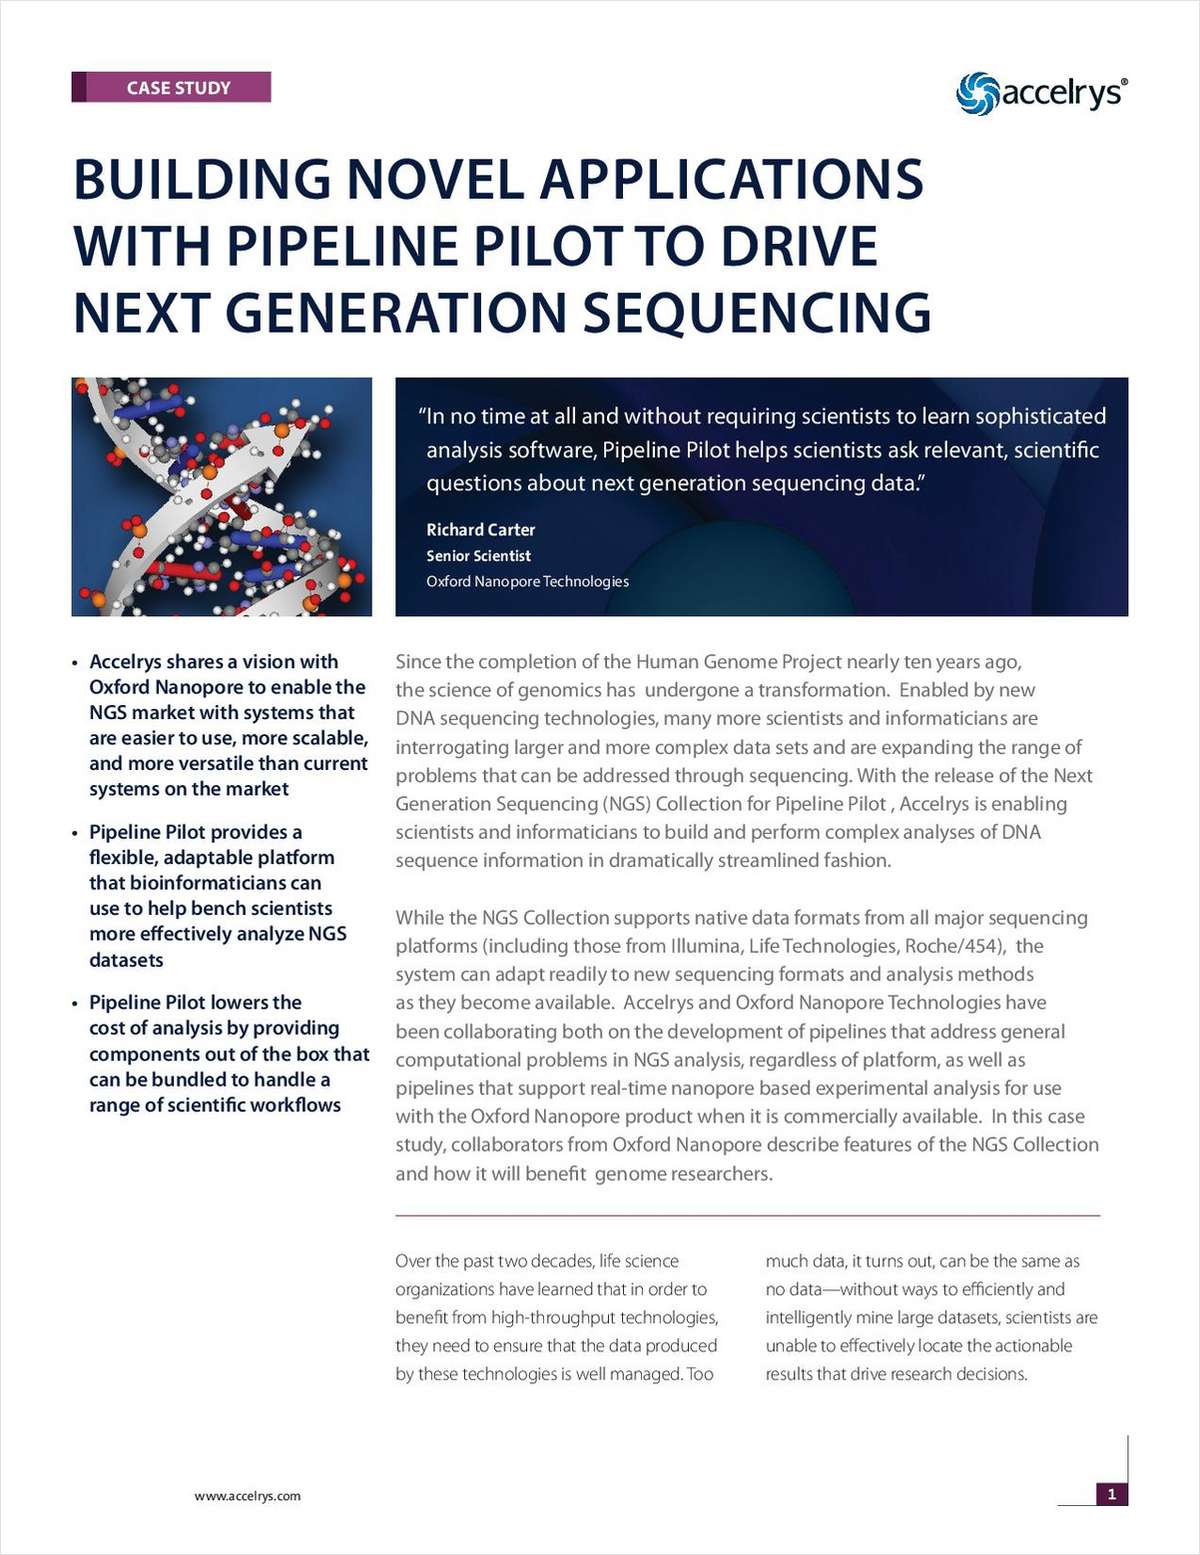 Building Novel Applications with Pipeline Pilot to Drive Next Generation Sequencing